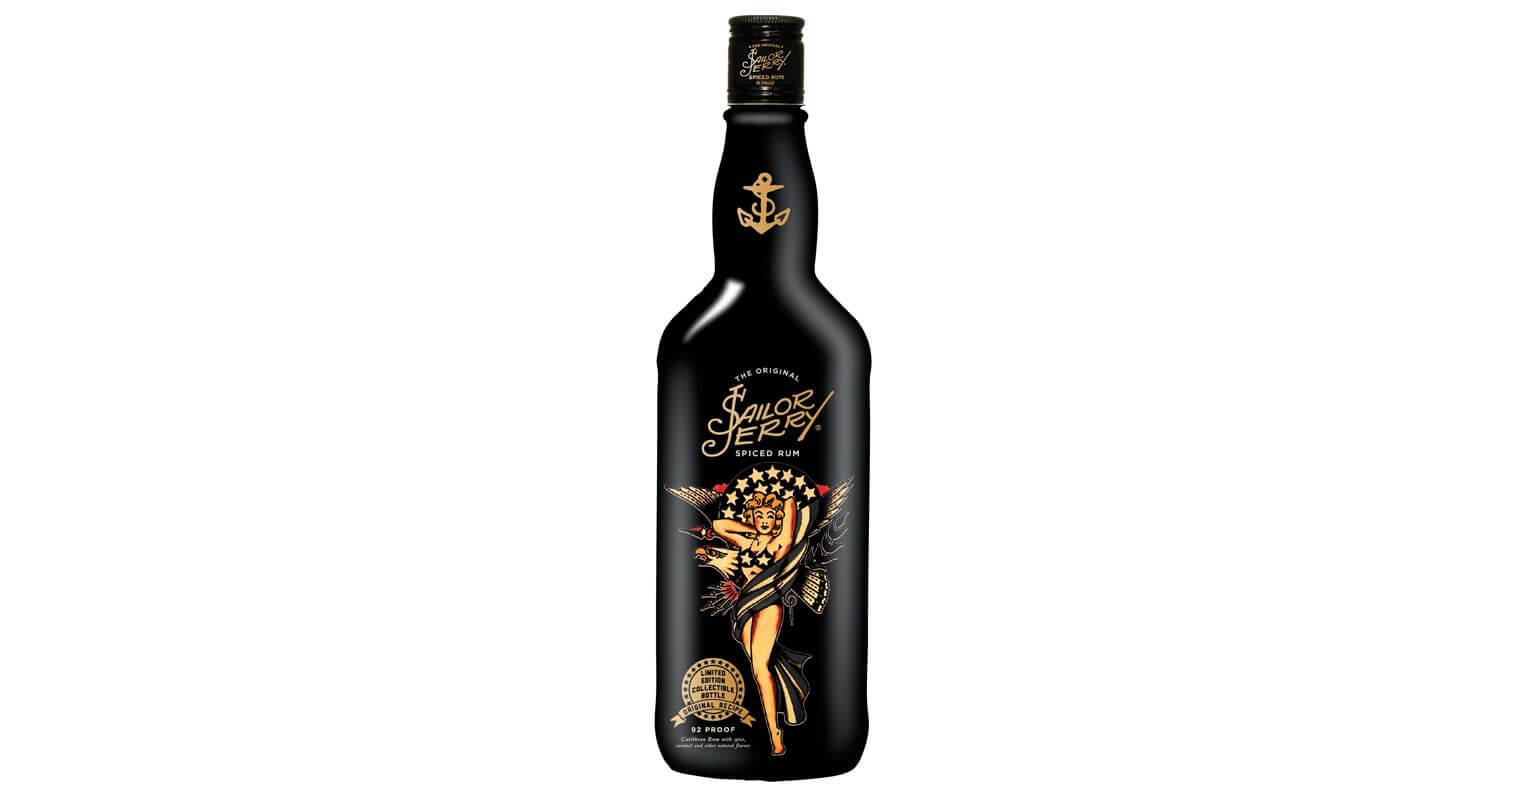 Sailor Jerry Launches Limited Edition Bottle for 4th of July, featured image